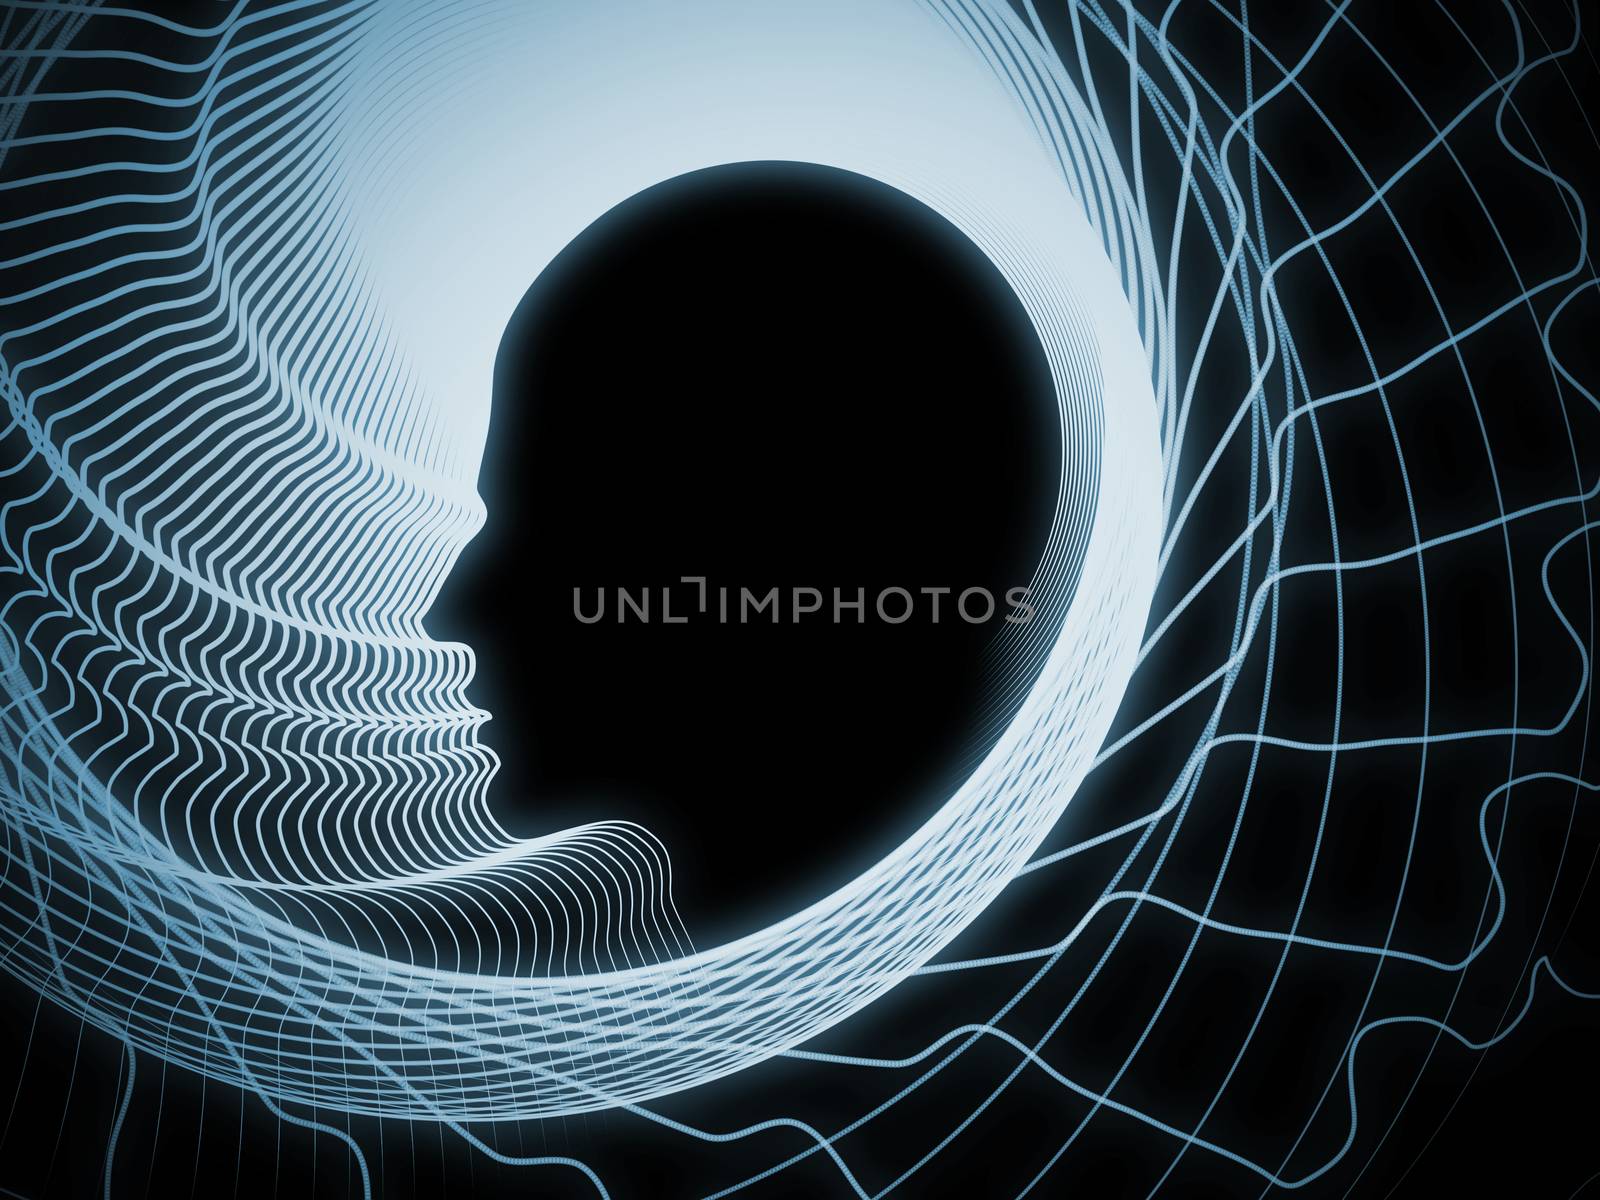 Geometry of Soul series. Background design of profile lines of human head on the subject of education, science, technology and graphic design